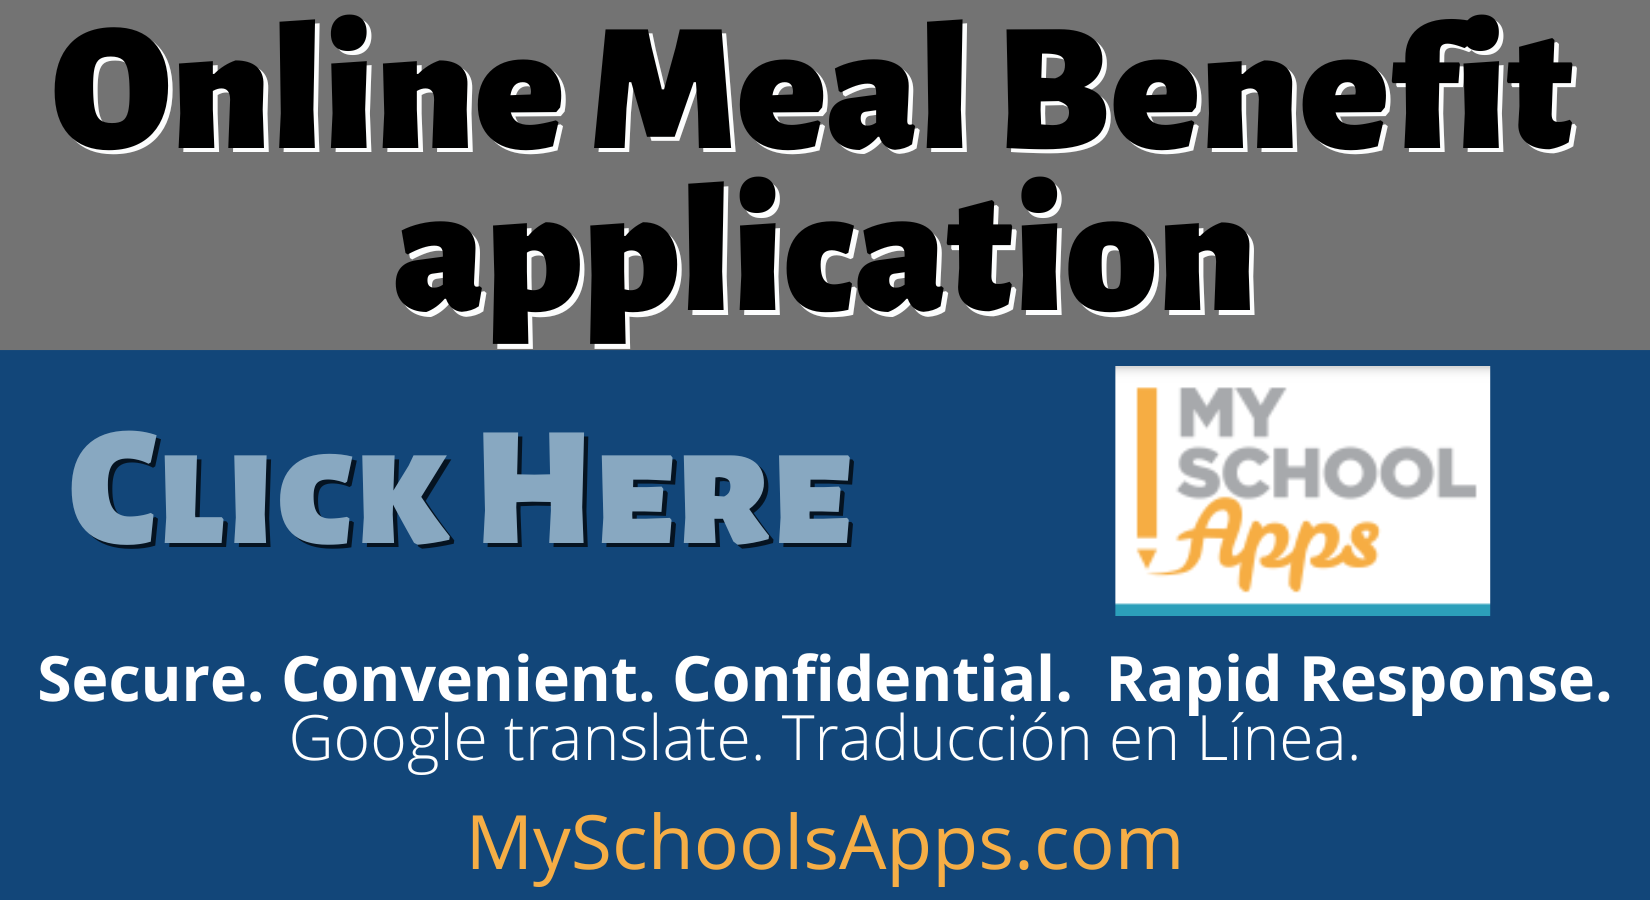 2023 Meal Benefit Application (1).png